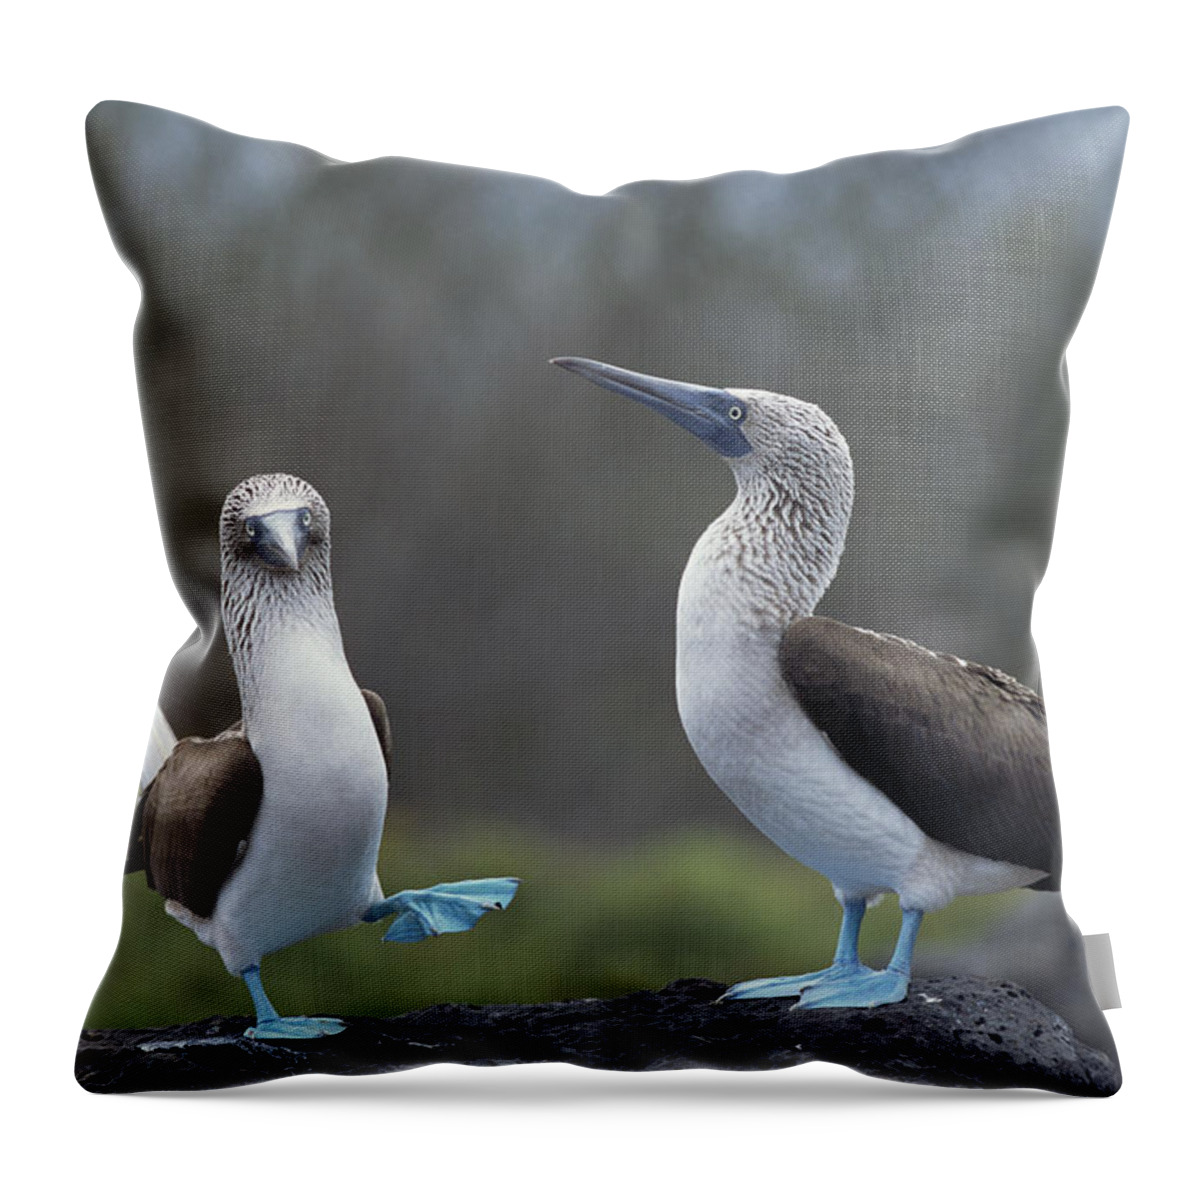 Feb0514 Throw Pillow featuring the photograph Blue-footed Booby Courtship Dance by Tui De Roy